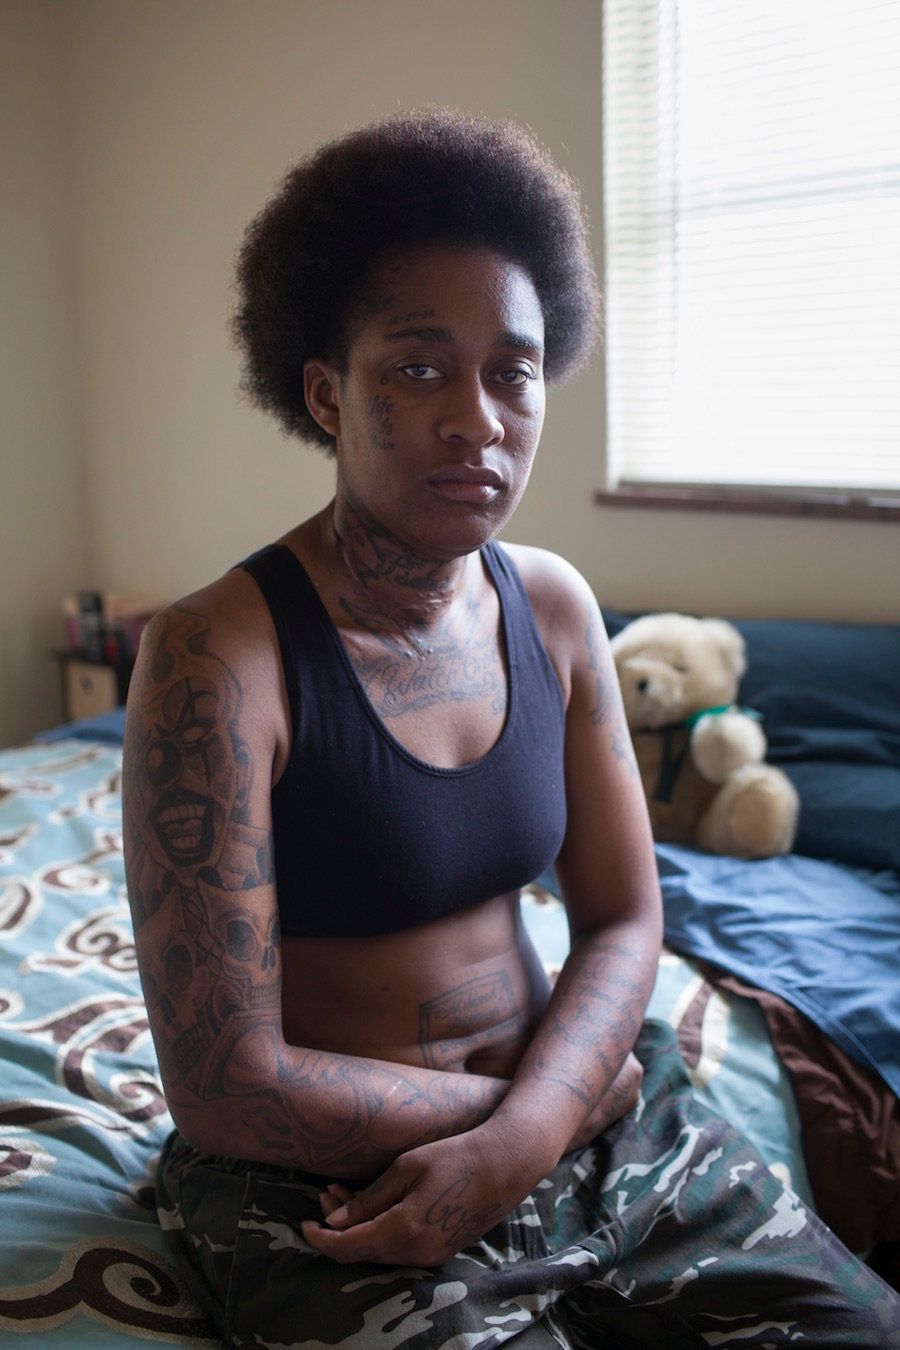 <strong>"Shanessa </strong>was shot by her sister’s boyfriend. A year later, she was shot again, in the face and hand; this time it was by his friends who wanted to stop her from testifying against him." (Newport News, Virginia, 2014 and 2015.)